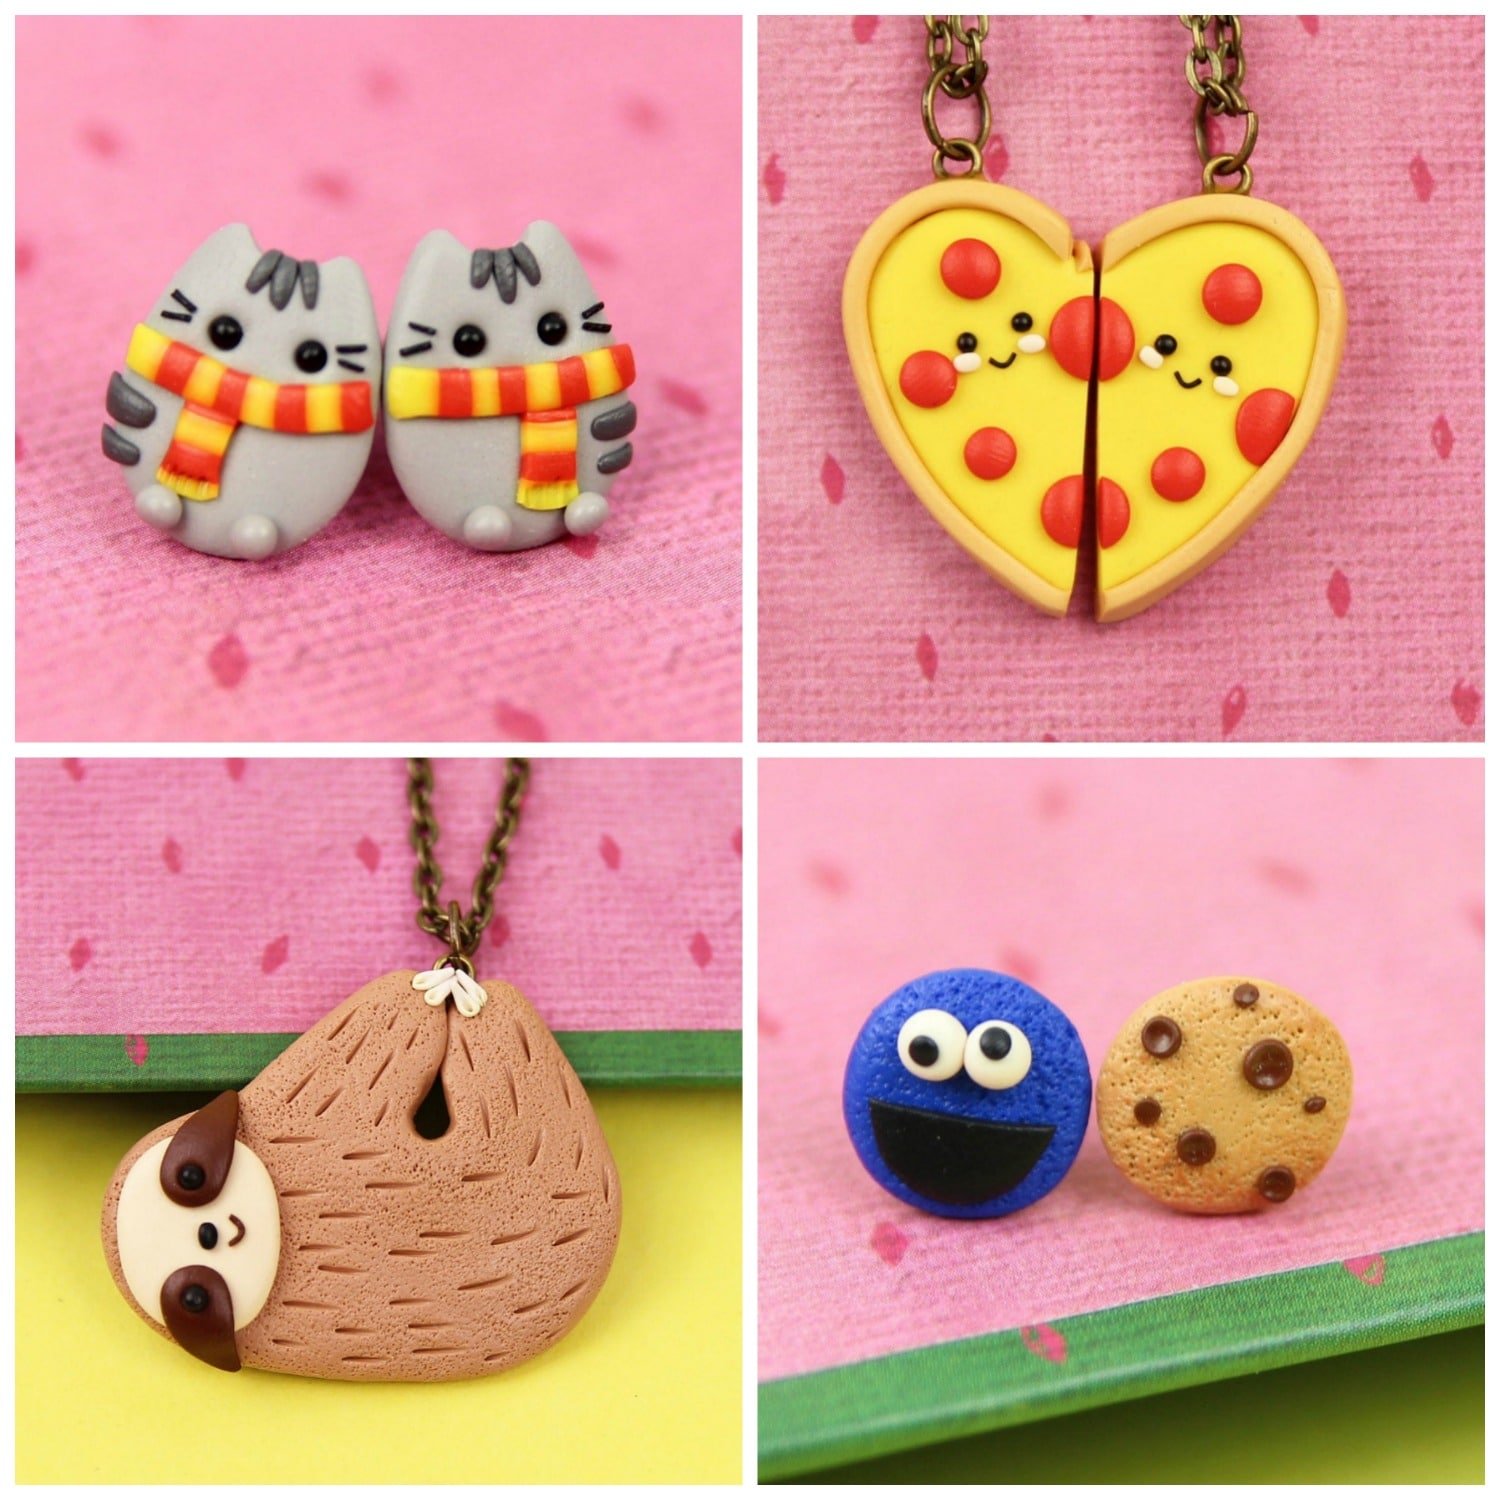 cutiePie item collage featuring pizza heart, sloth, cookie monster, and pusheen cats